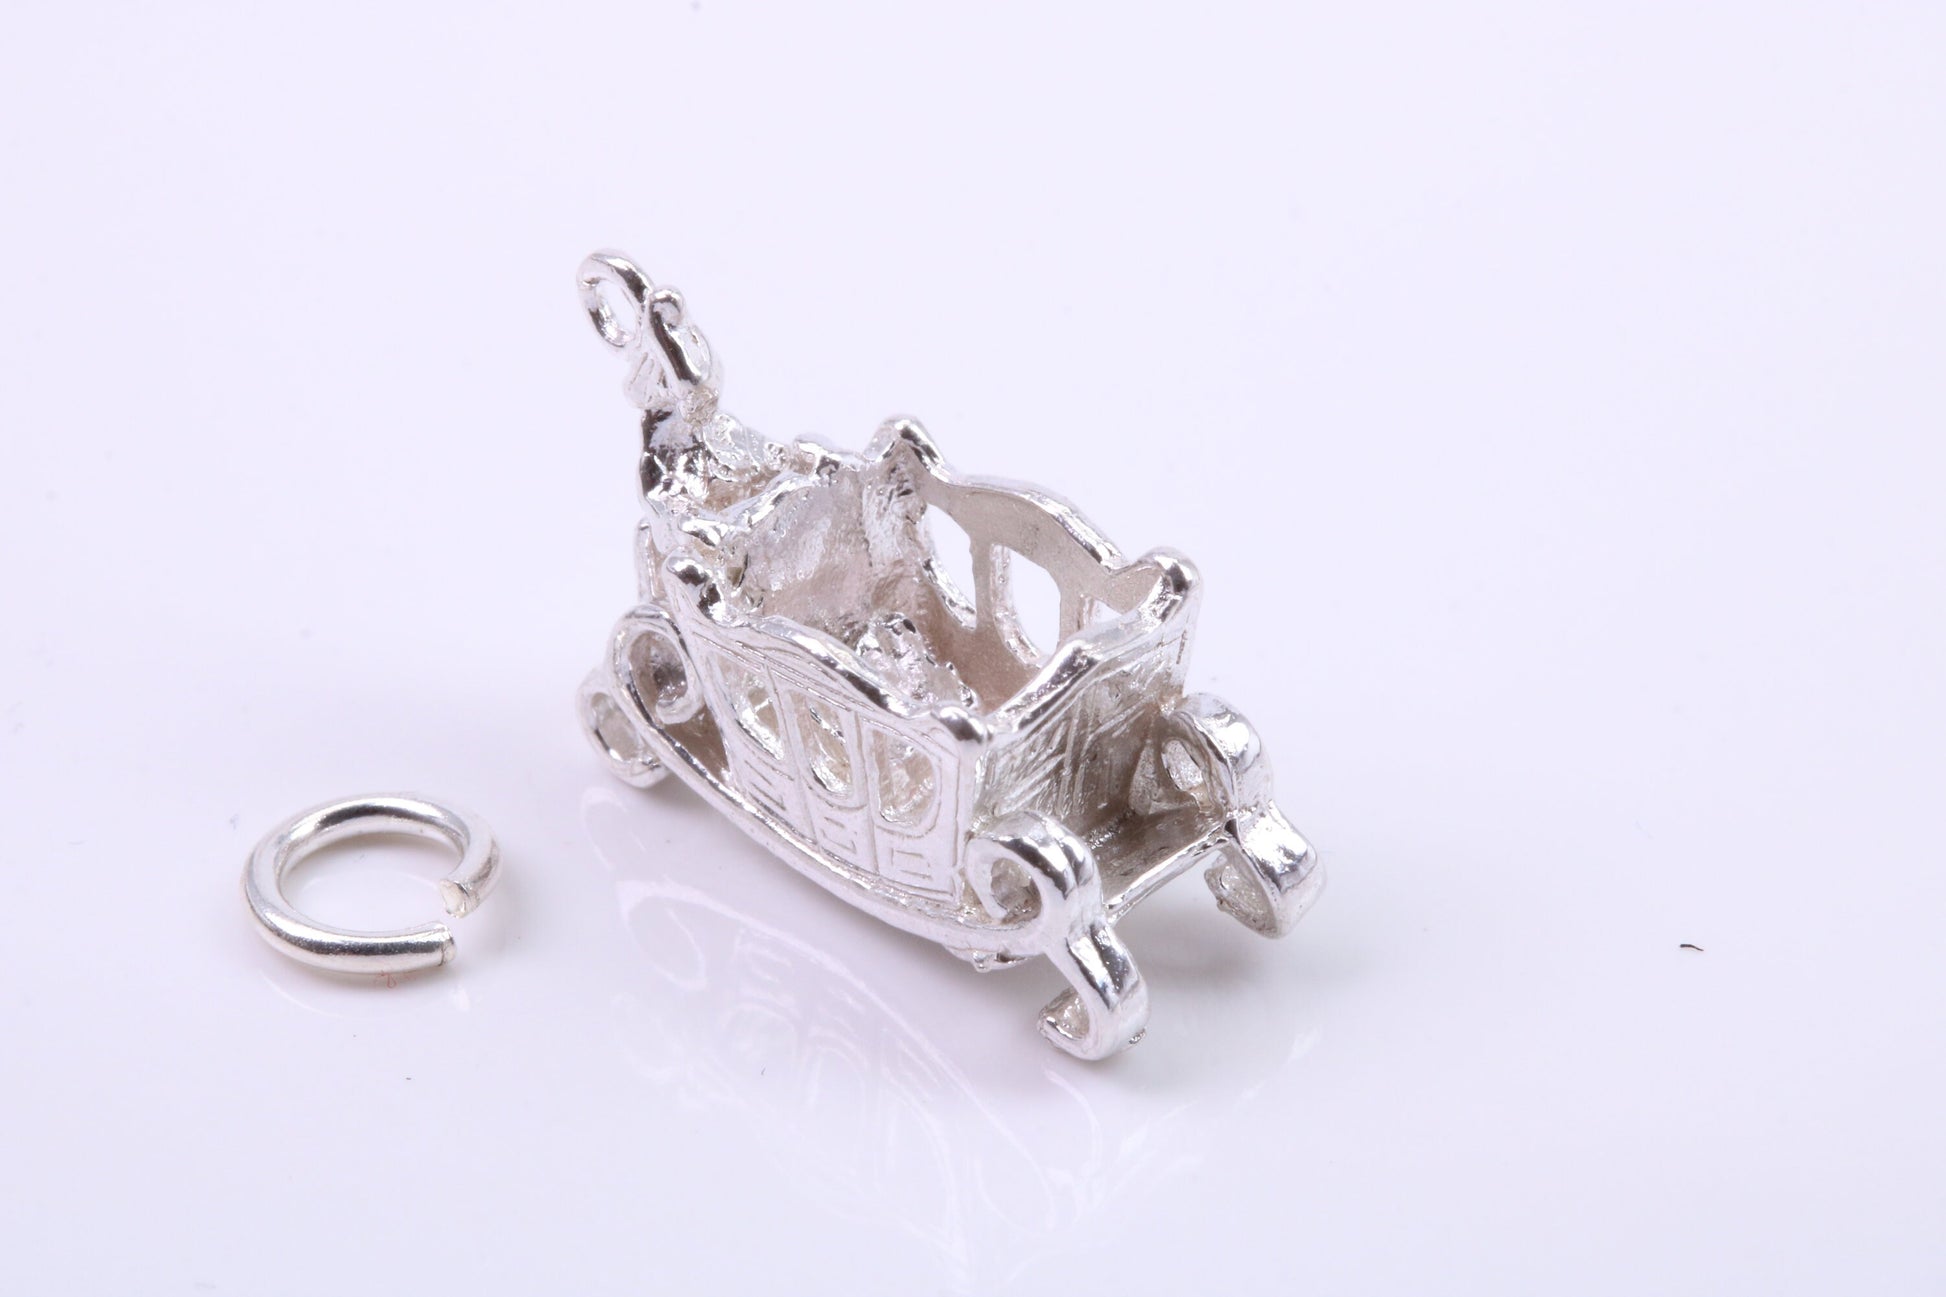 Princess Carriage Charm, Traditional Charm, Made from Solid 925 Grade Sterling Silver, Complete with Attachment Link